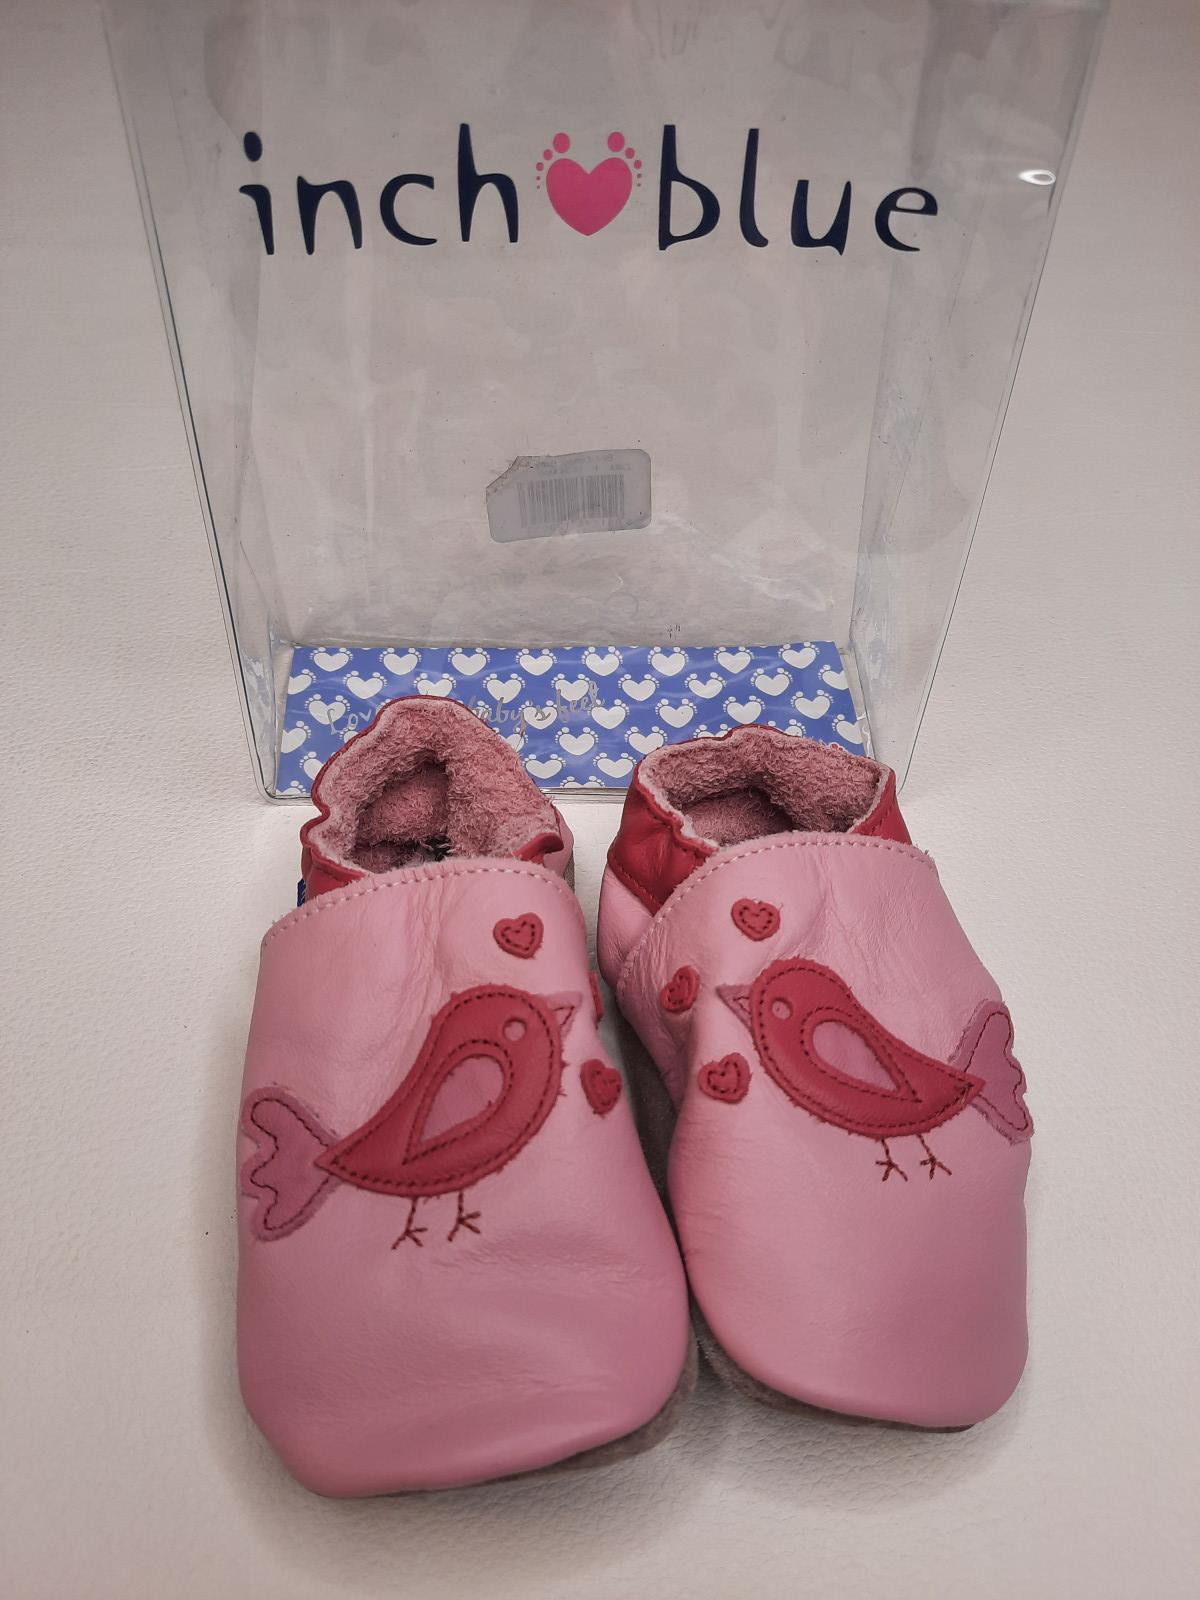 Chaussons en cuir 18 - 24 mois Bird d'amour baby - photo 6